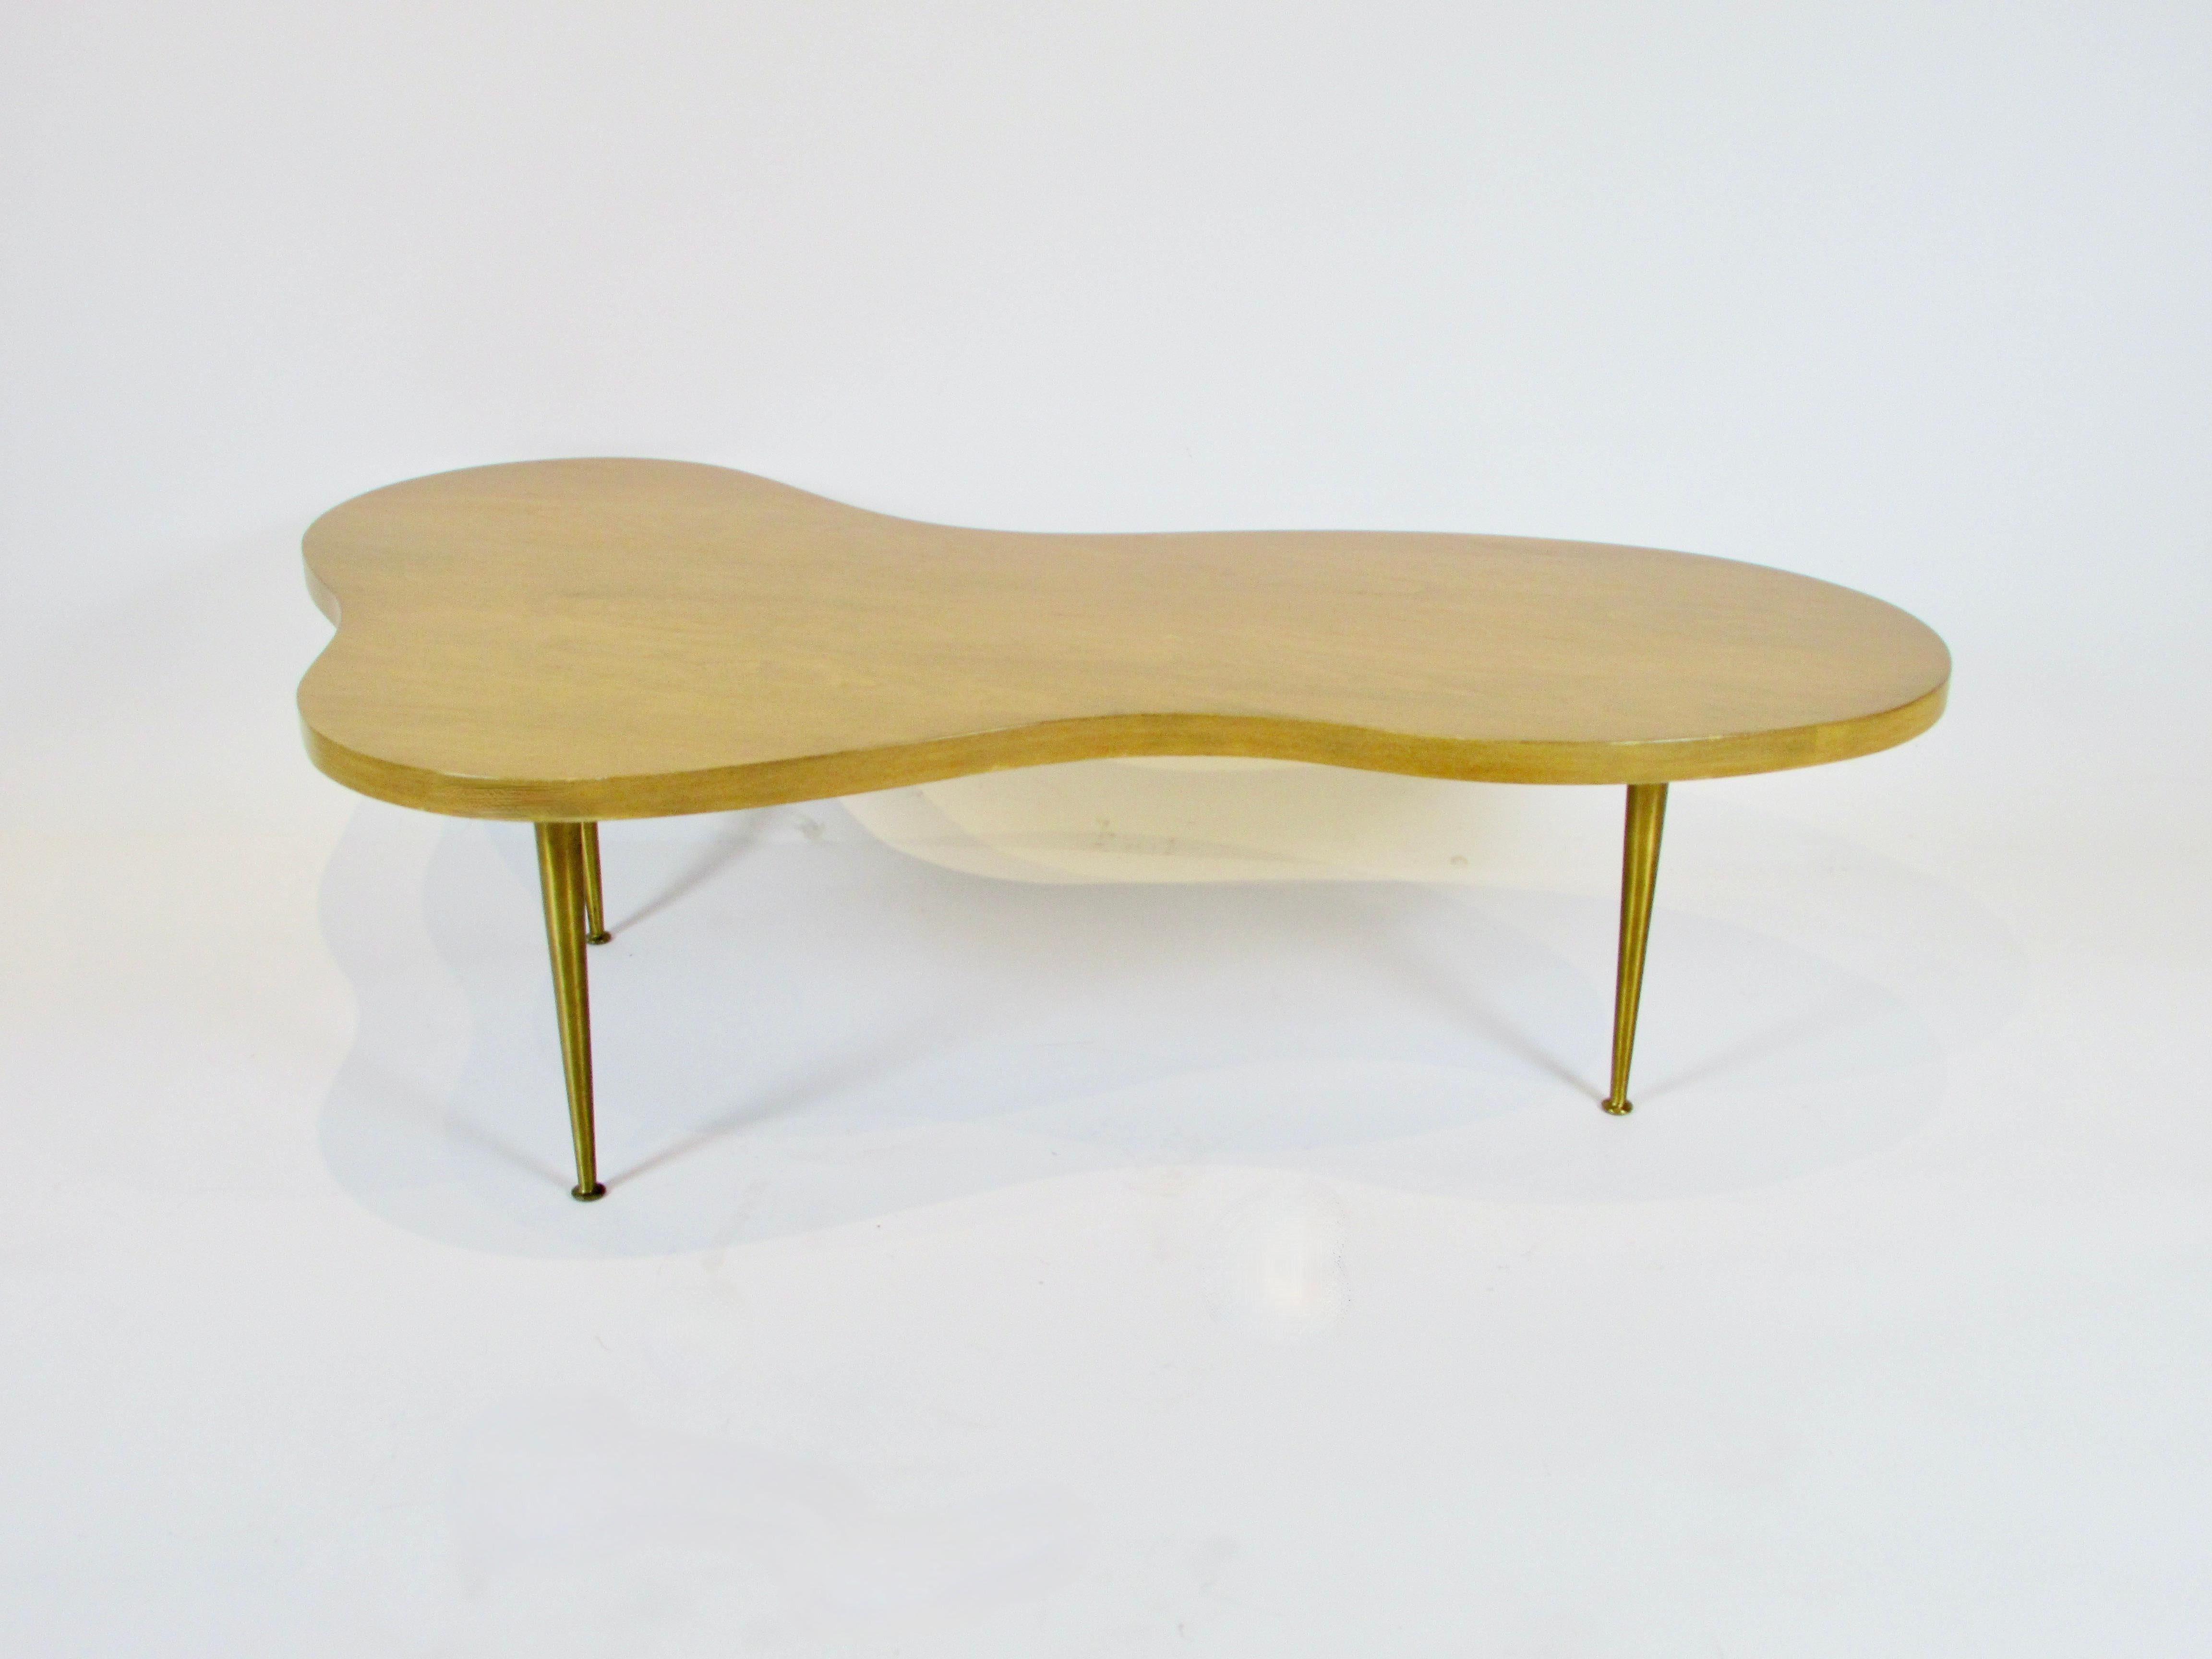 Simple elegant and stunning. One of the more iconic Robsjohn Gibbings for Widdicomb designs. Biomorphic 